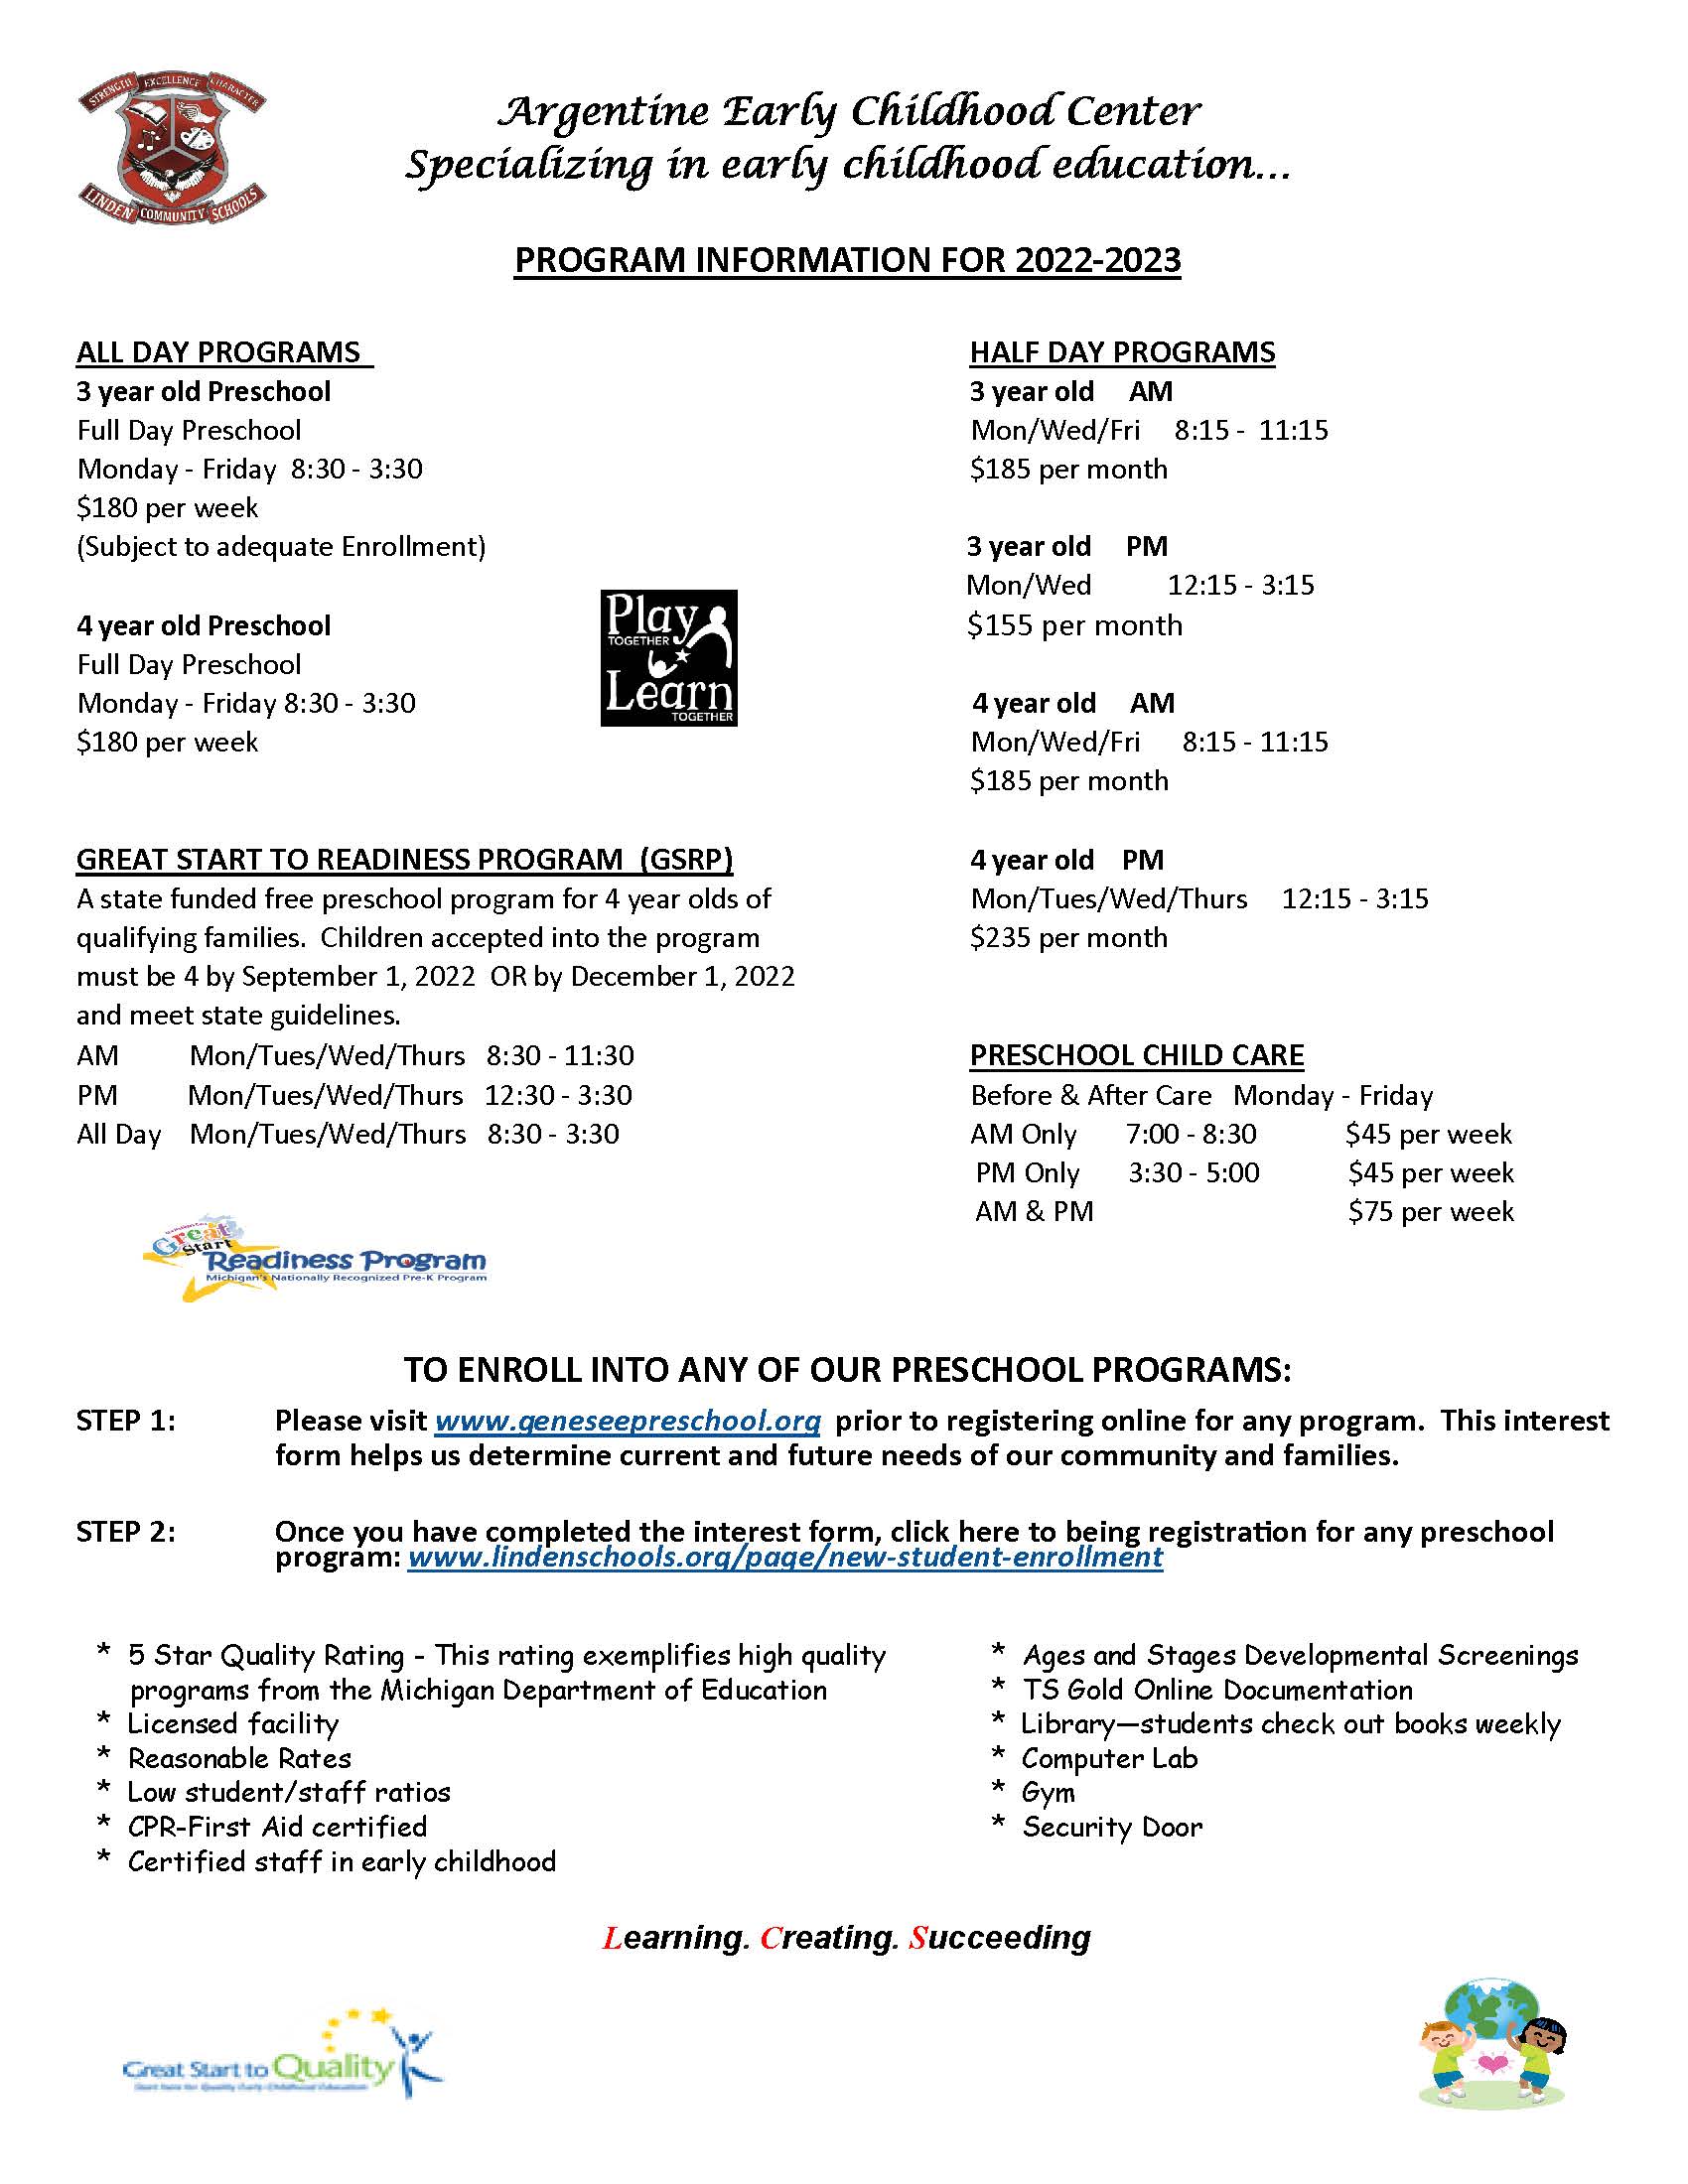 Preschool Information Classes and times and cost